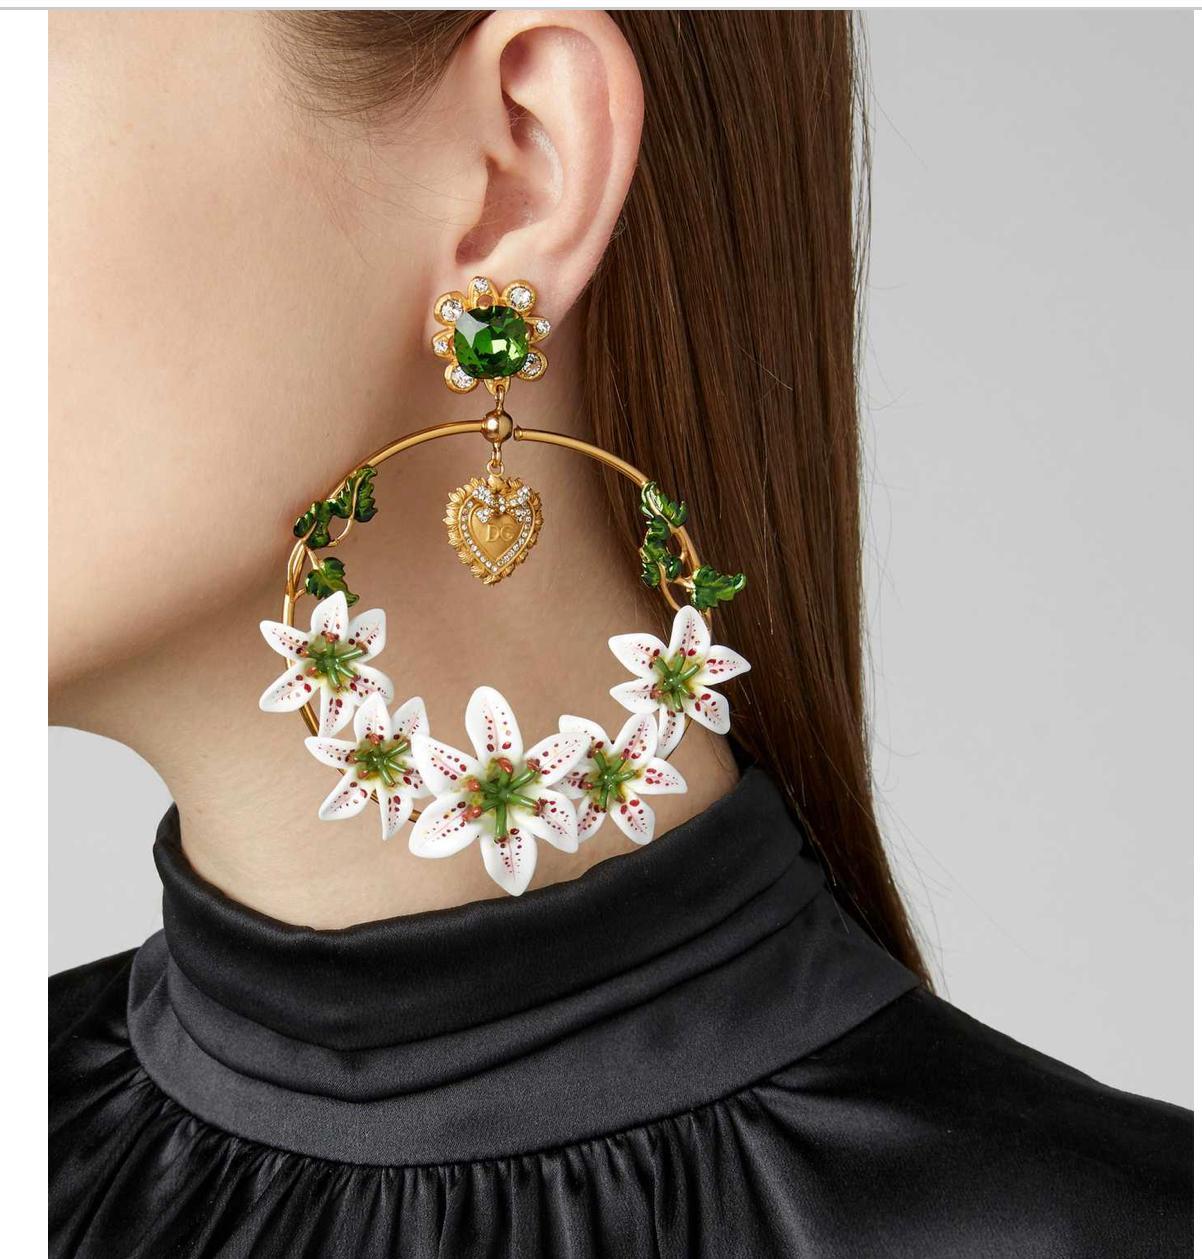 DOLCE & GABBANA

Gorgeous brand new with tags, 100% Authentic Dolce & Gabbana Gold Tone Brass Crystal Devotion Lilies Drop Clip On Earrings.

Model: Clip-on, dangling
Motive: Devotion, Lilies, Crystals
Material: 40% Brass 40% Resin 20% Glass
Color: